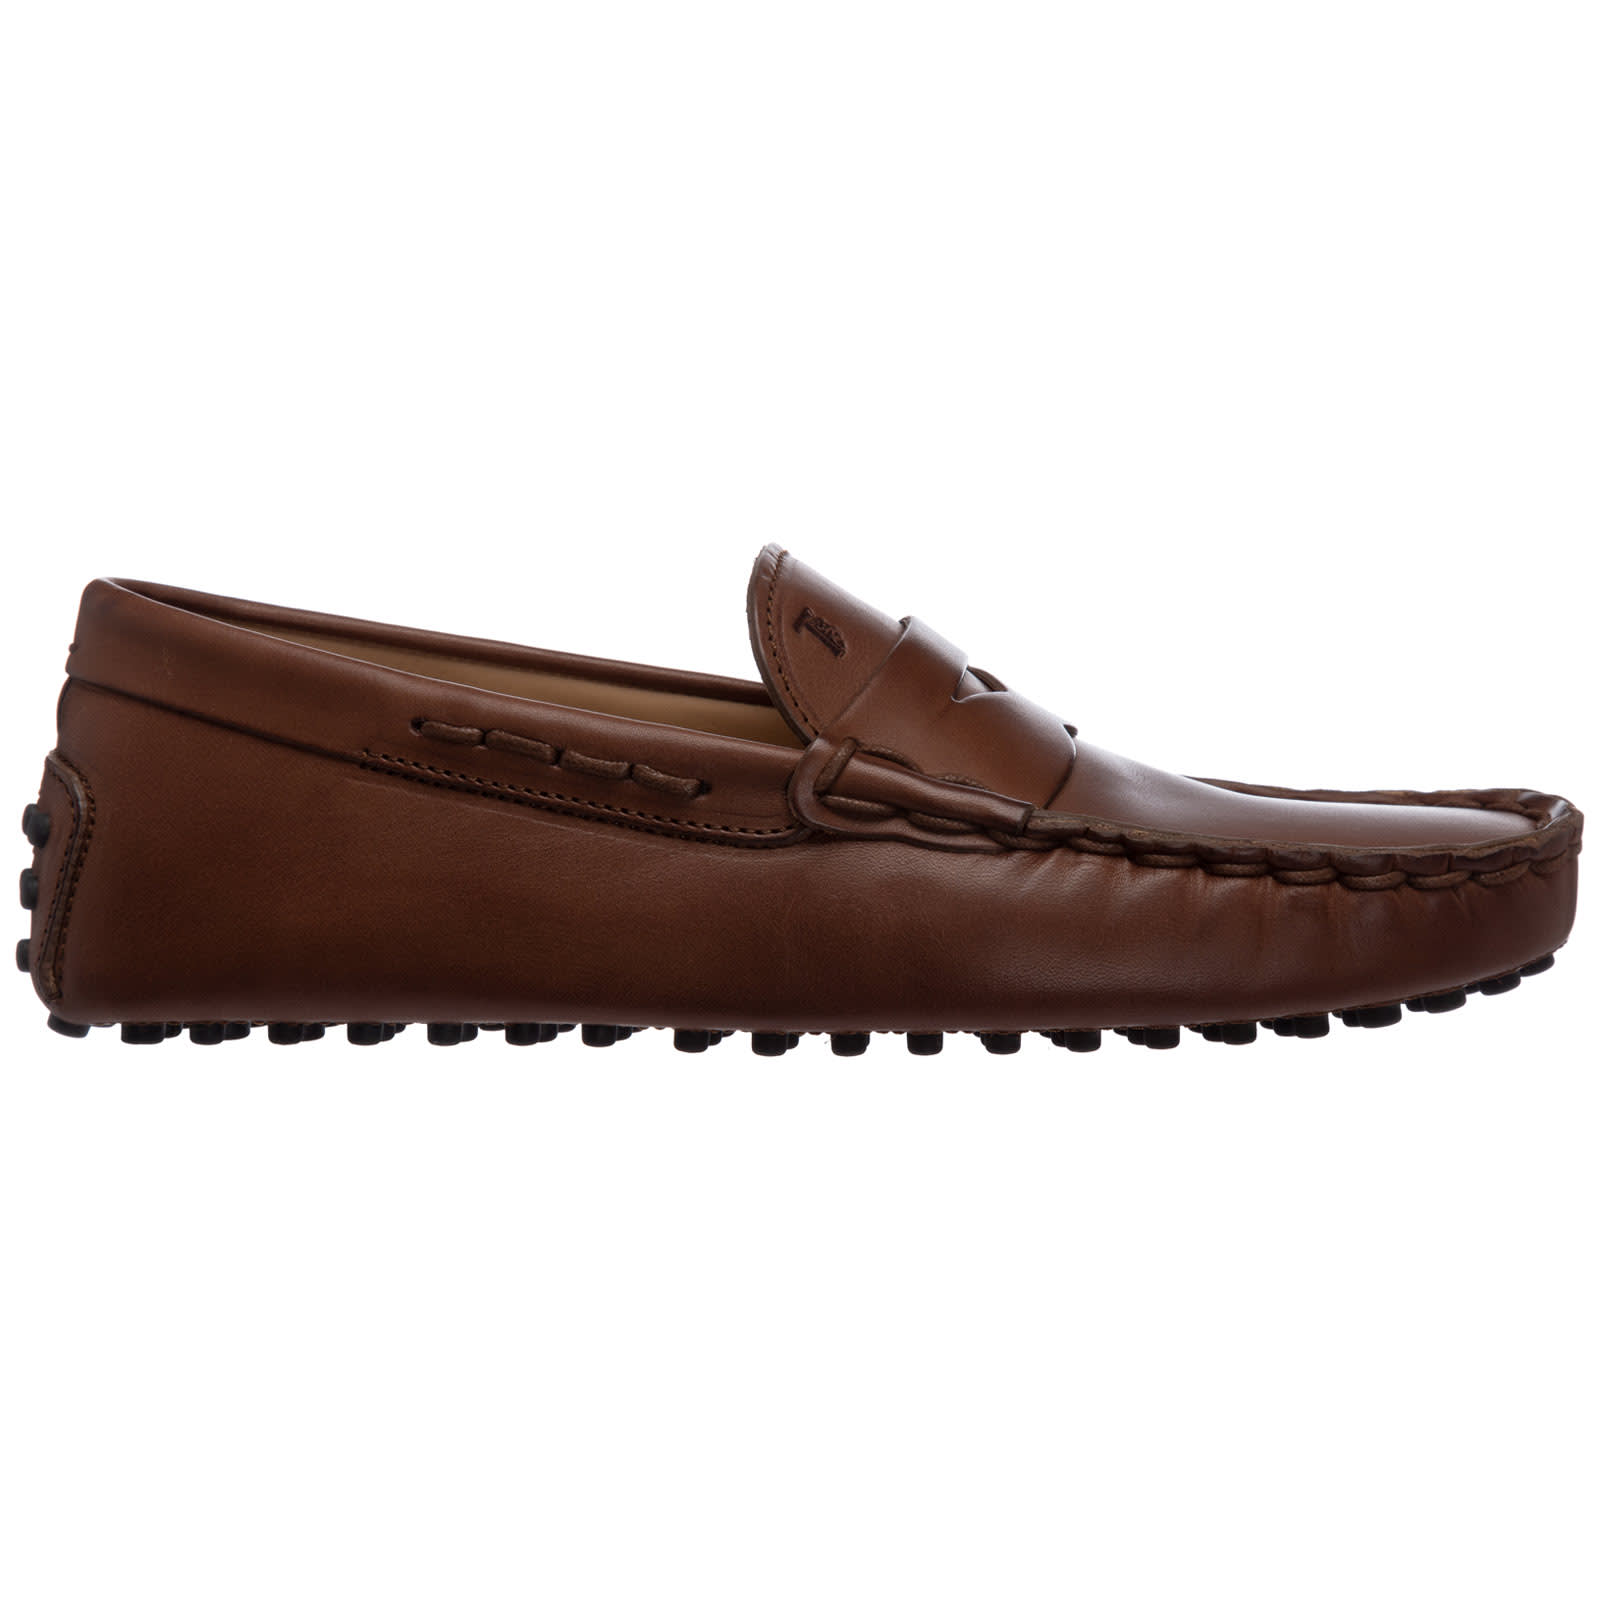 Tods Tournament Moccasins